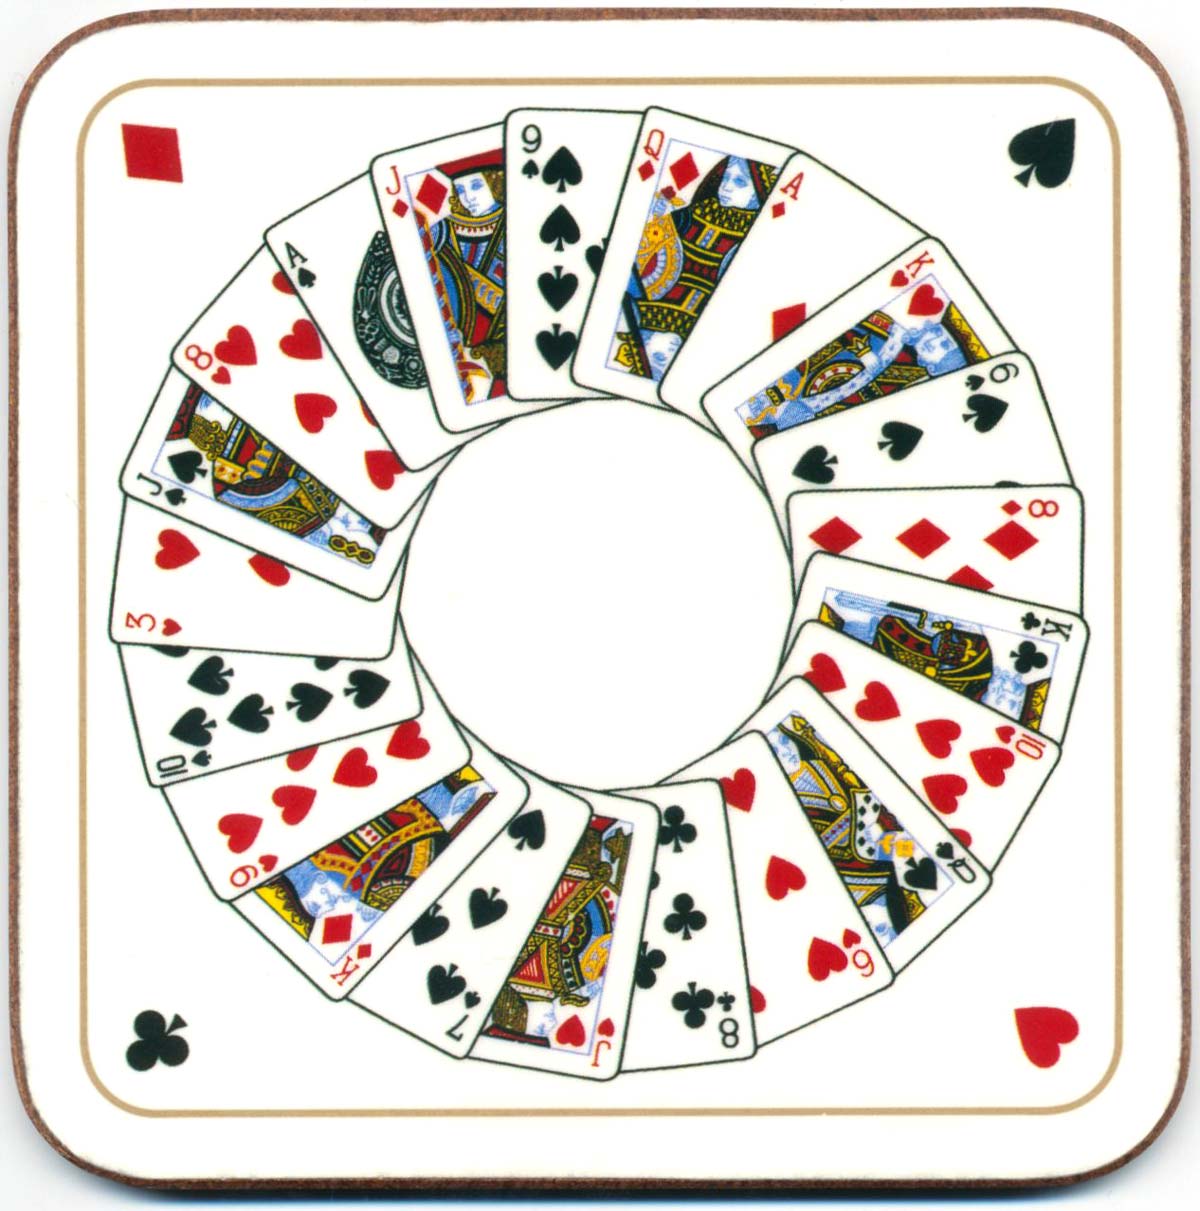 Playing card design coasters by Present Solutions, after 1974